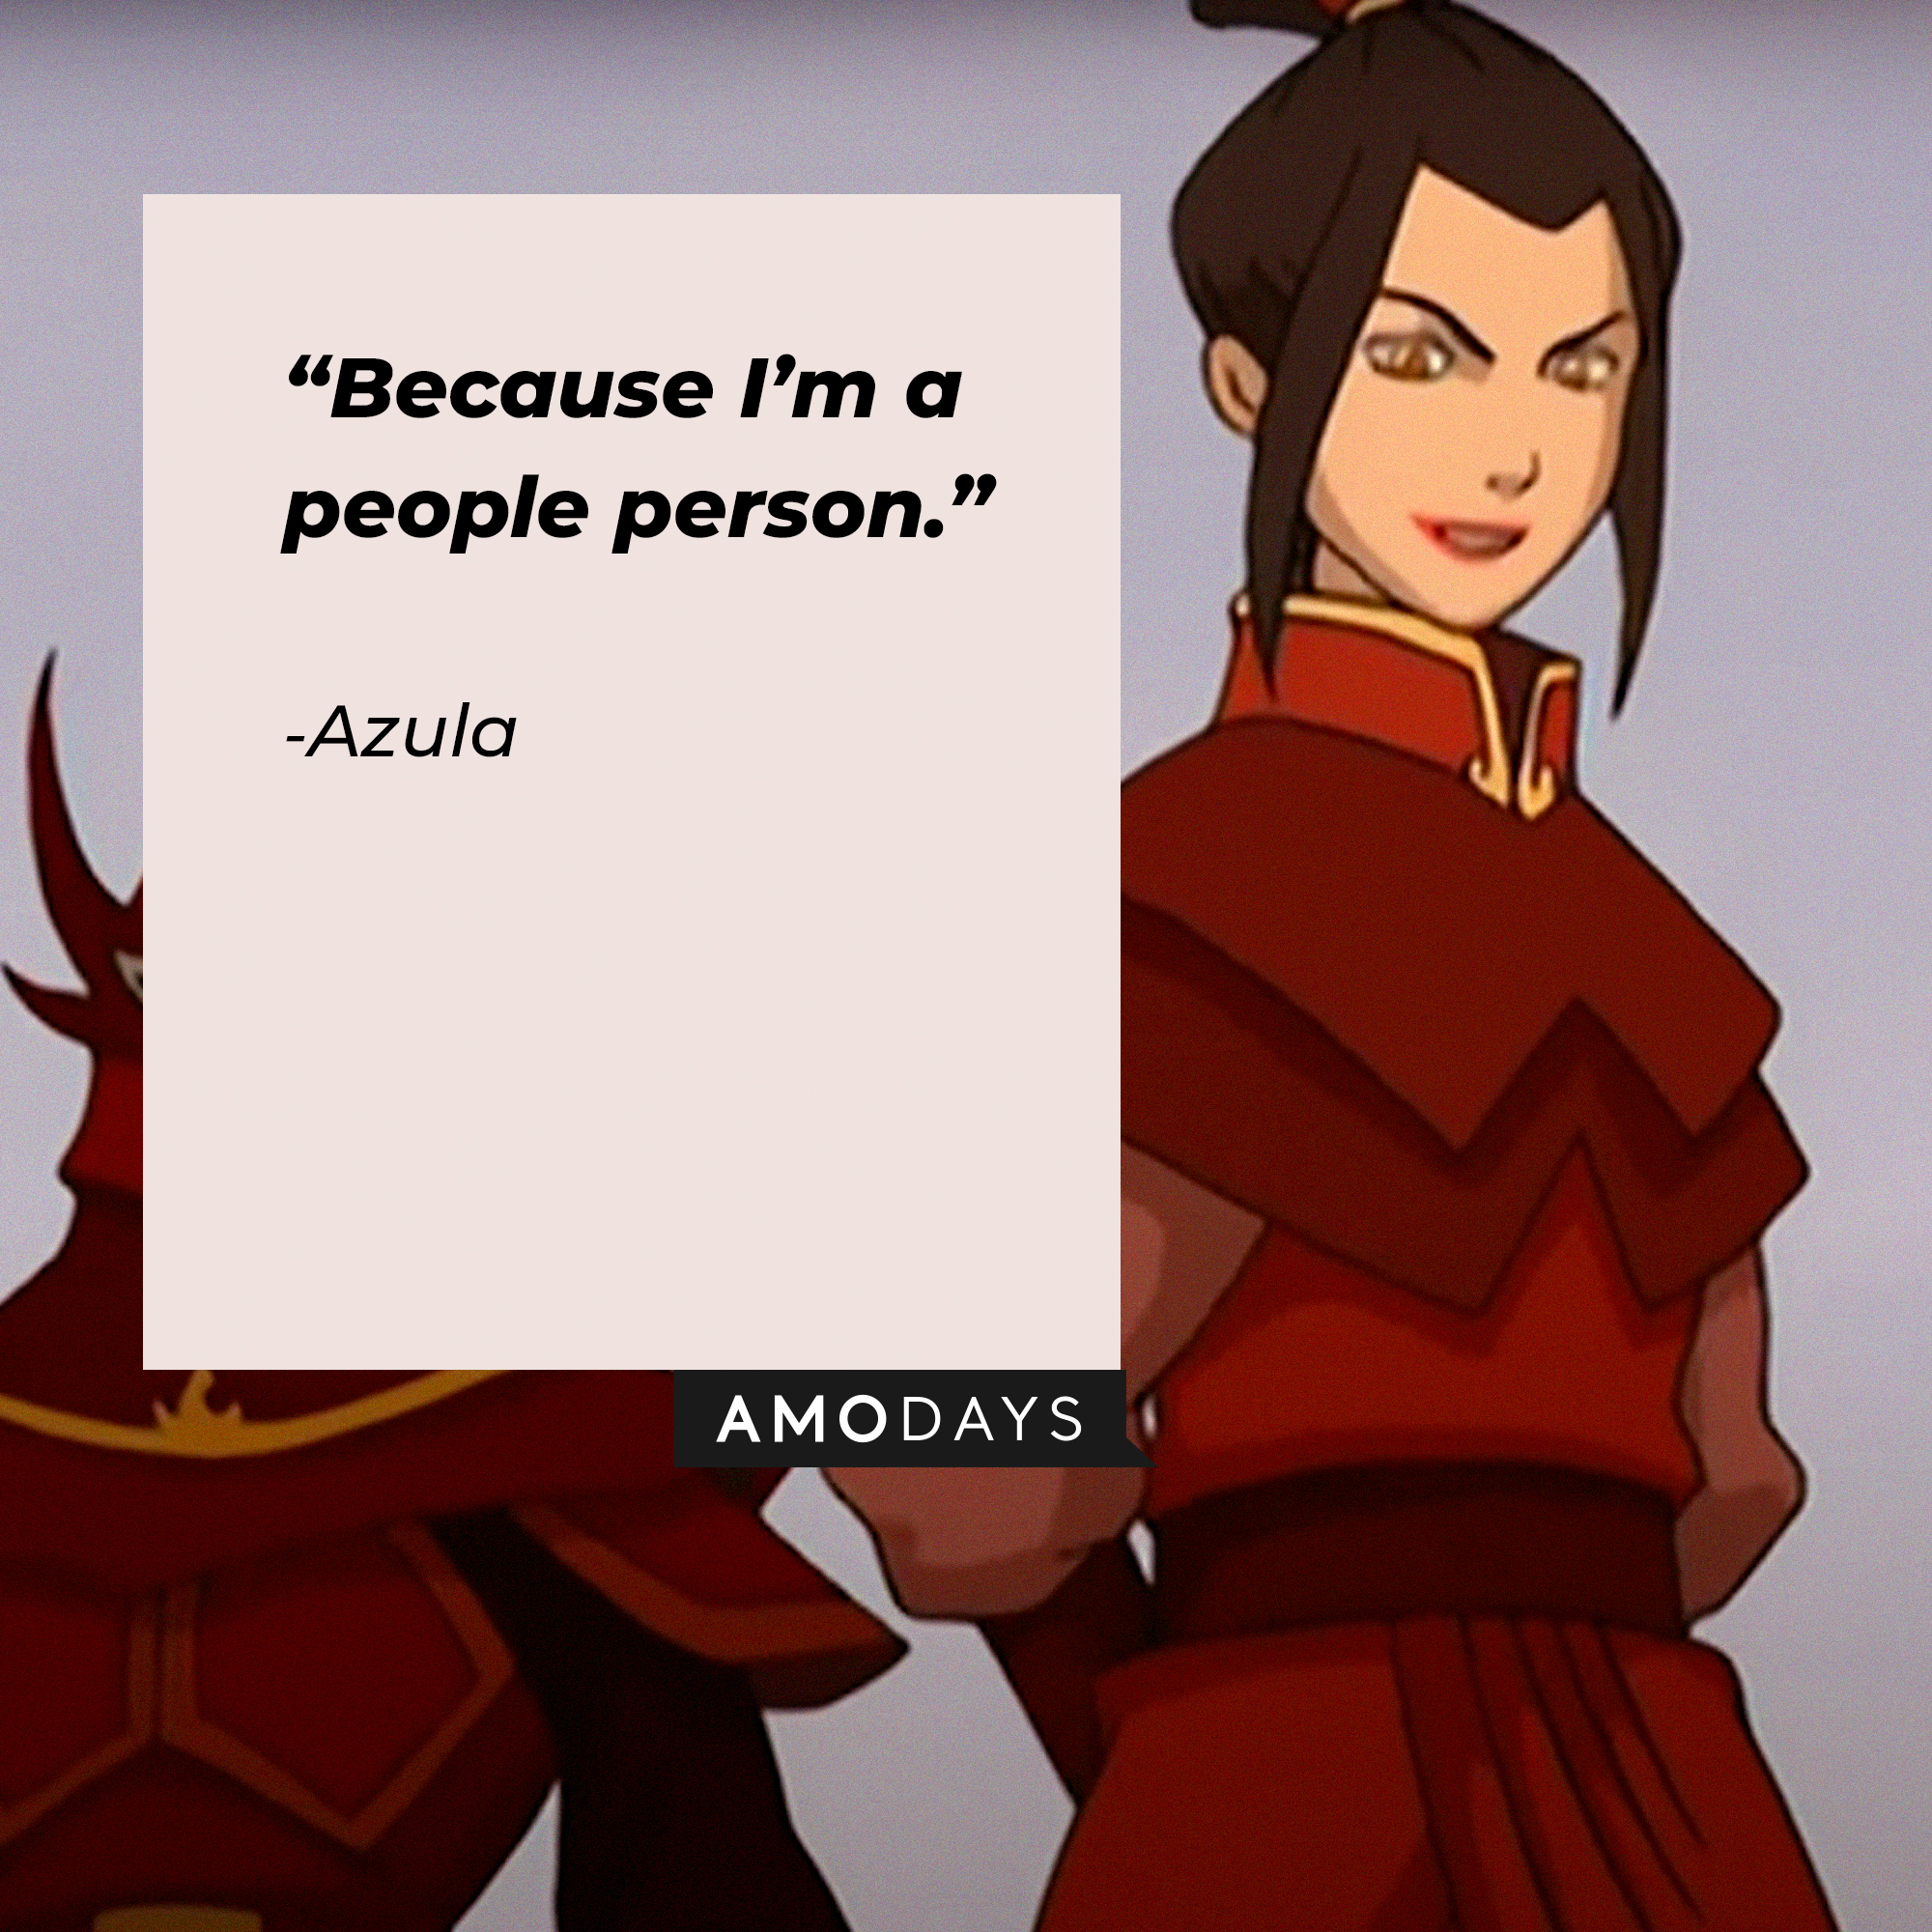 Azula's quote: “Because I’m a people person." | Source: youtube.com/TeamAvatar